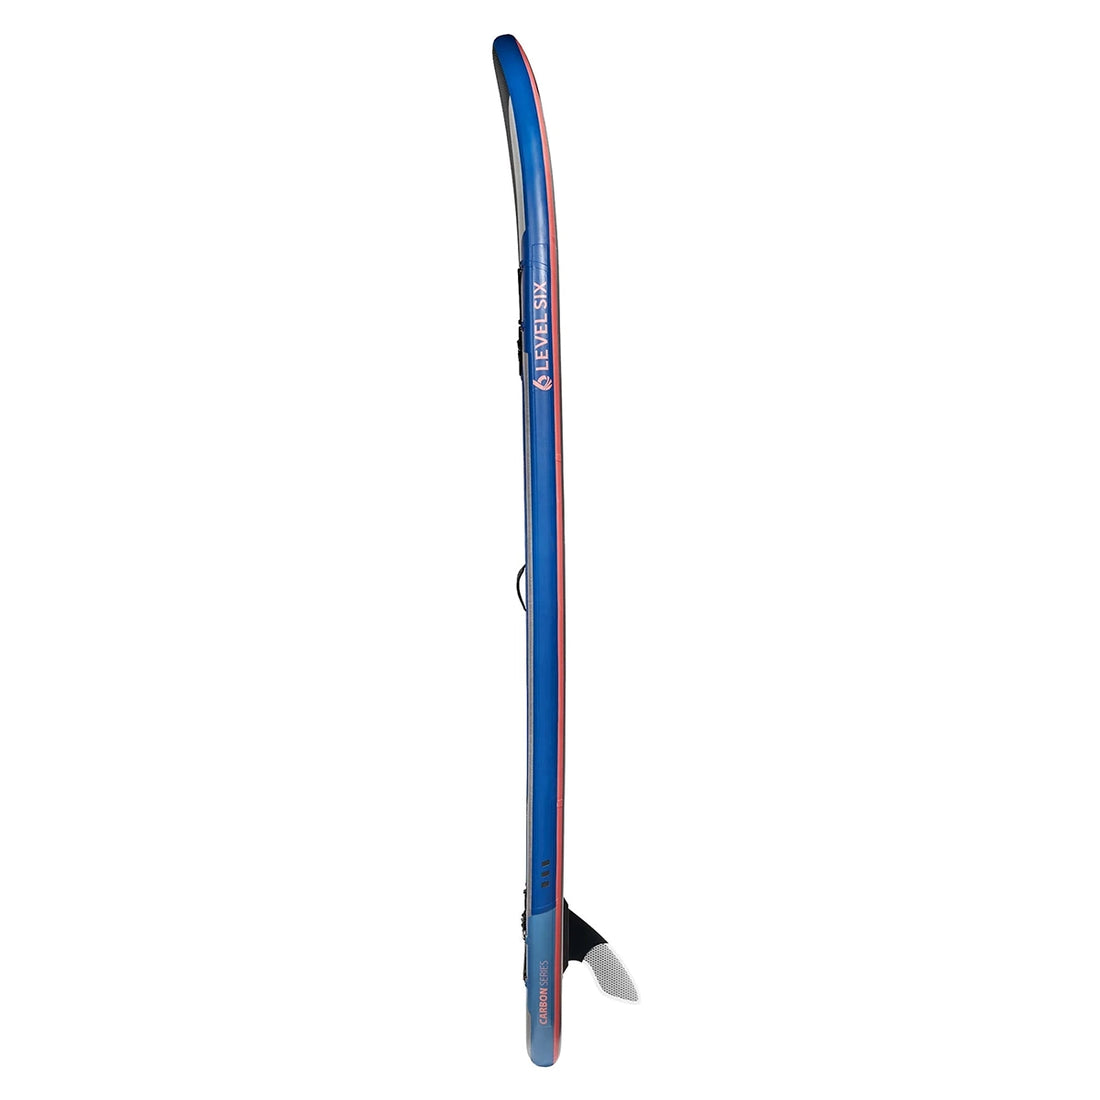 Twelve Six Carbon Inflatable SUP Board Package